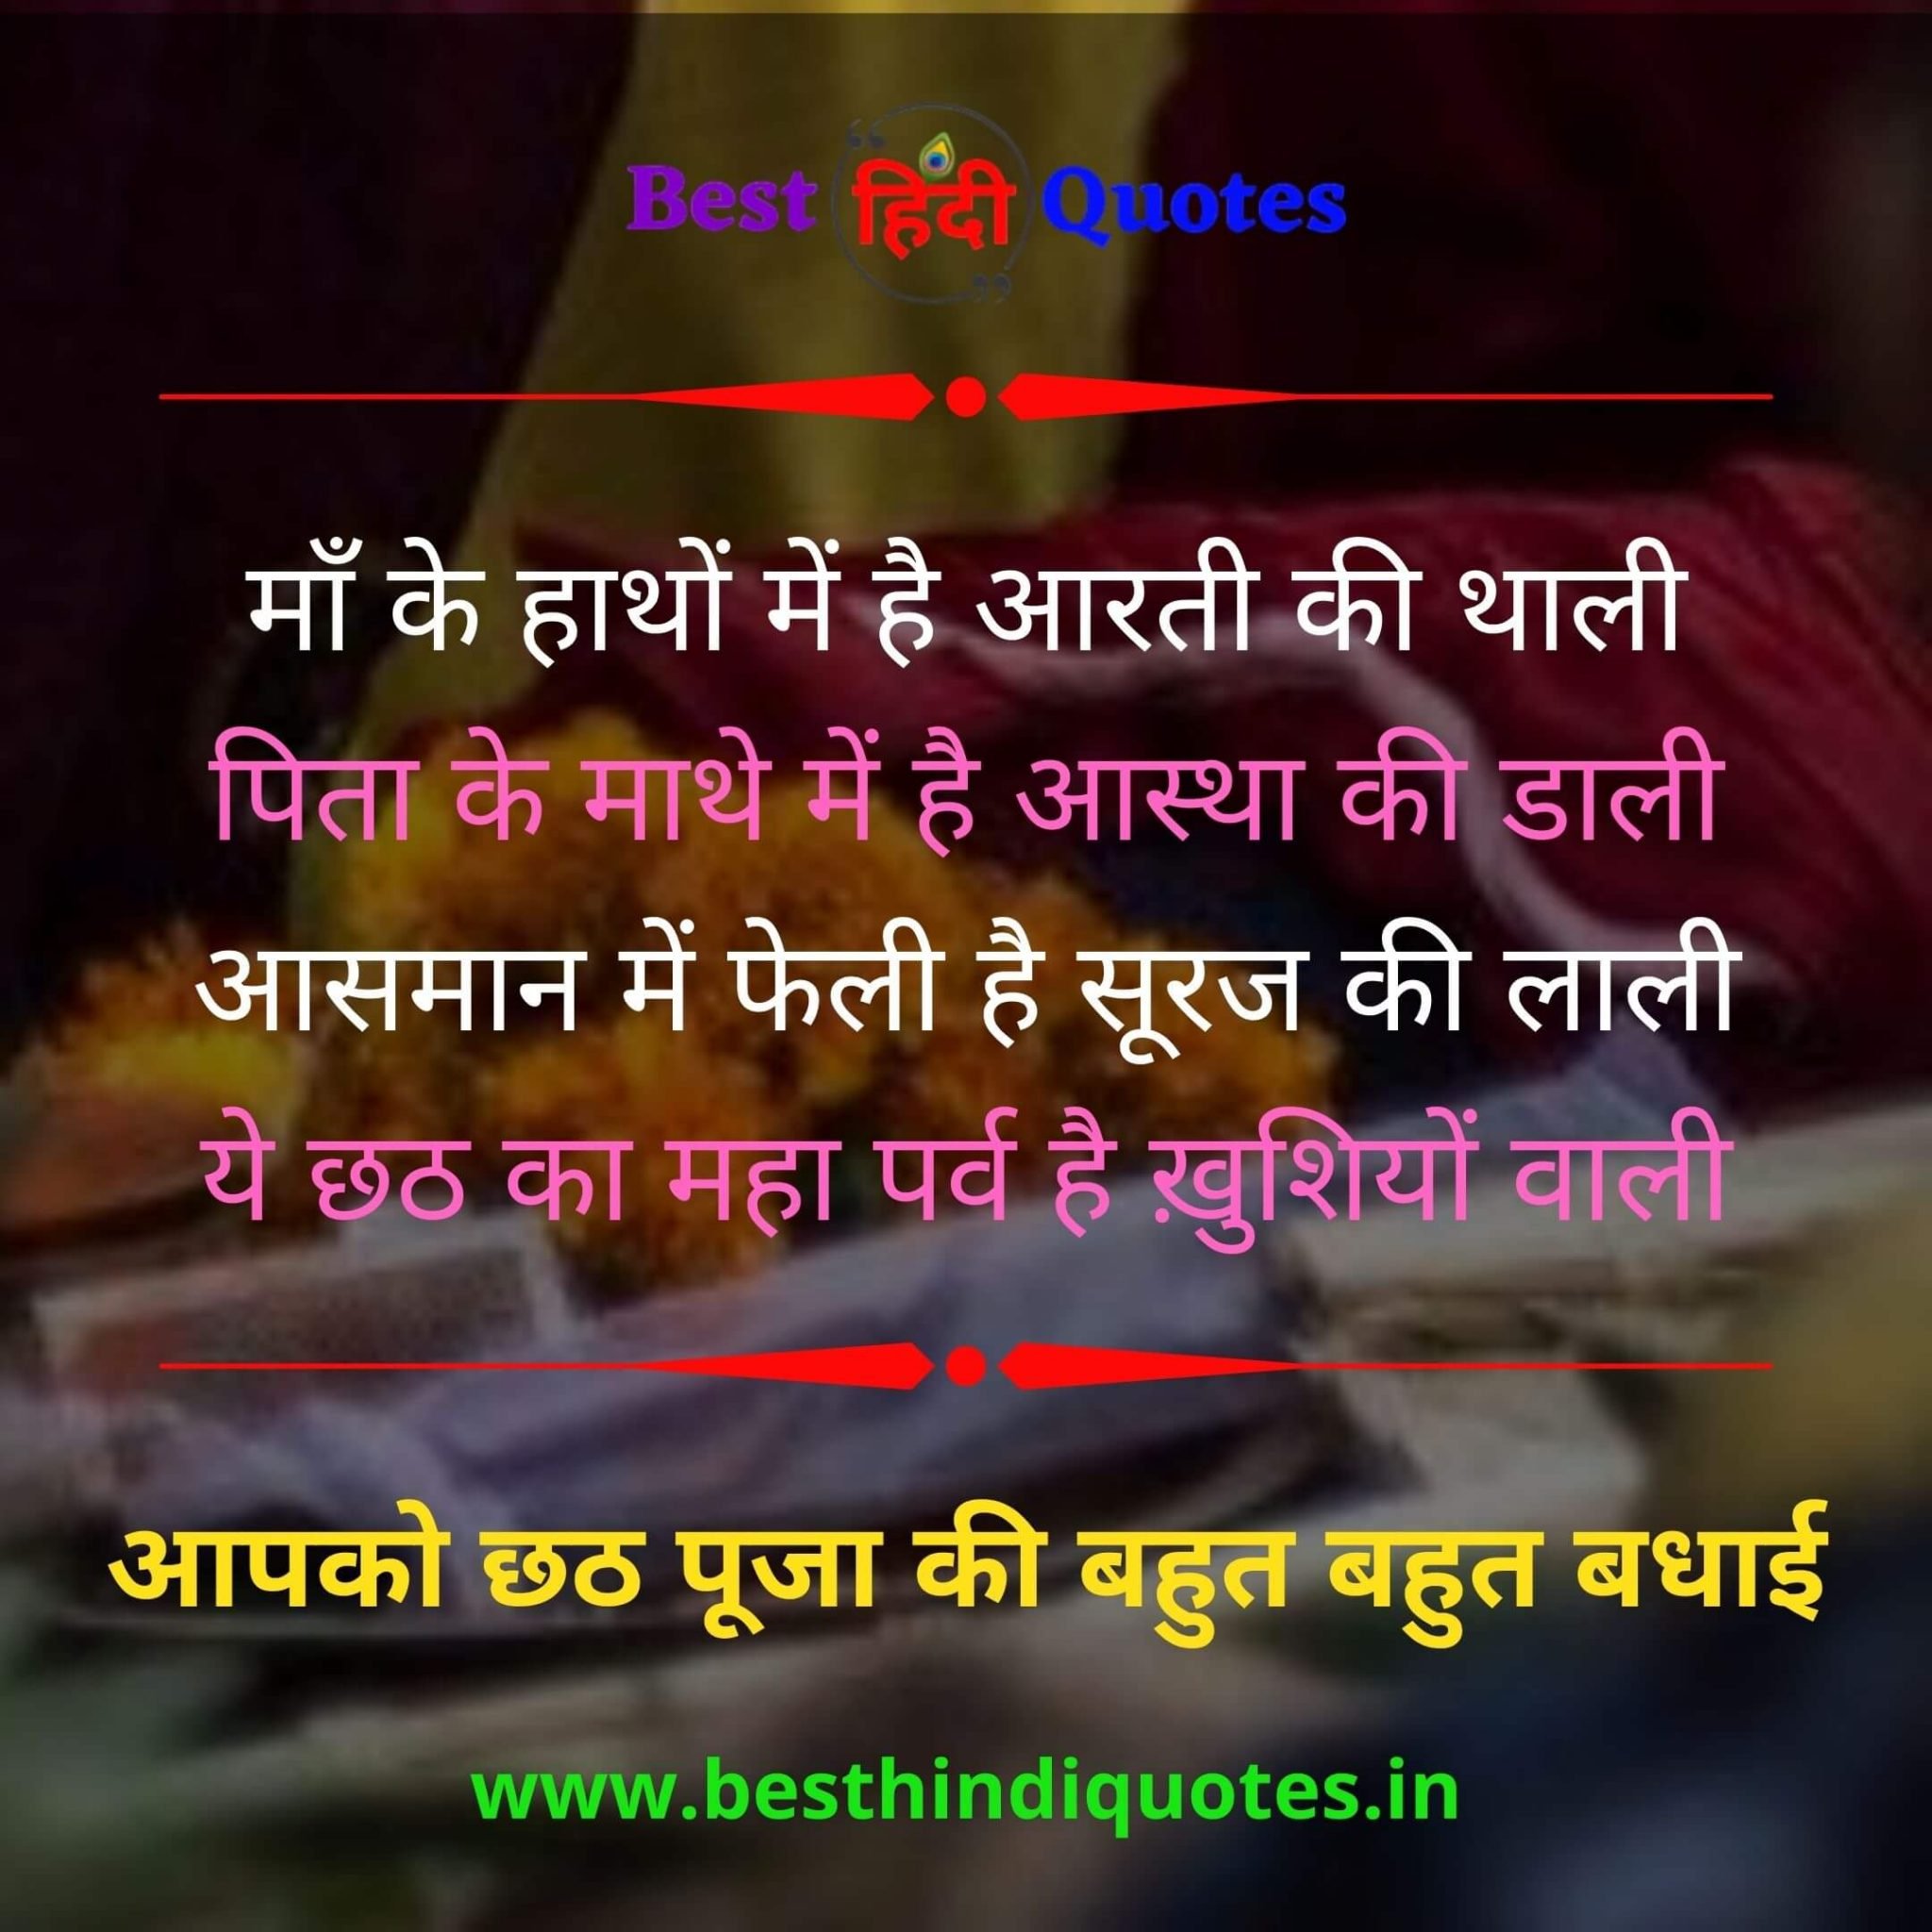 Chhath Puja Quotes in Hindi - Happy Chhath Puja - Best Hindi Quotes